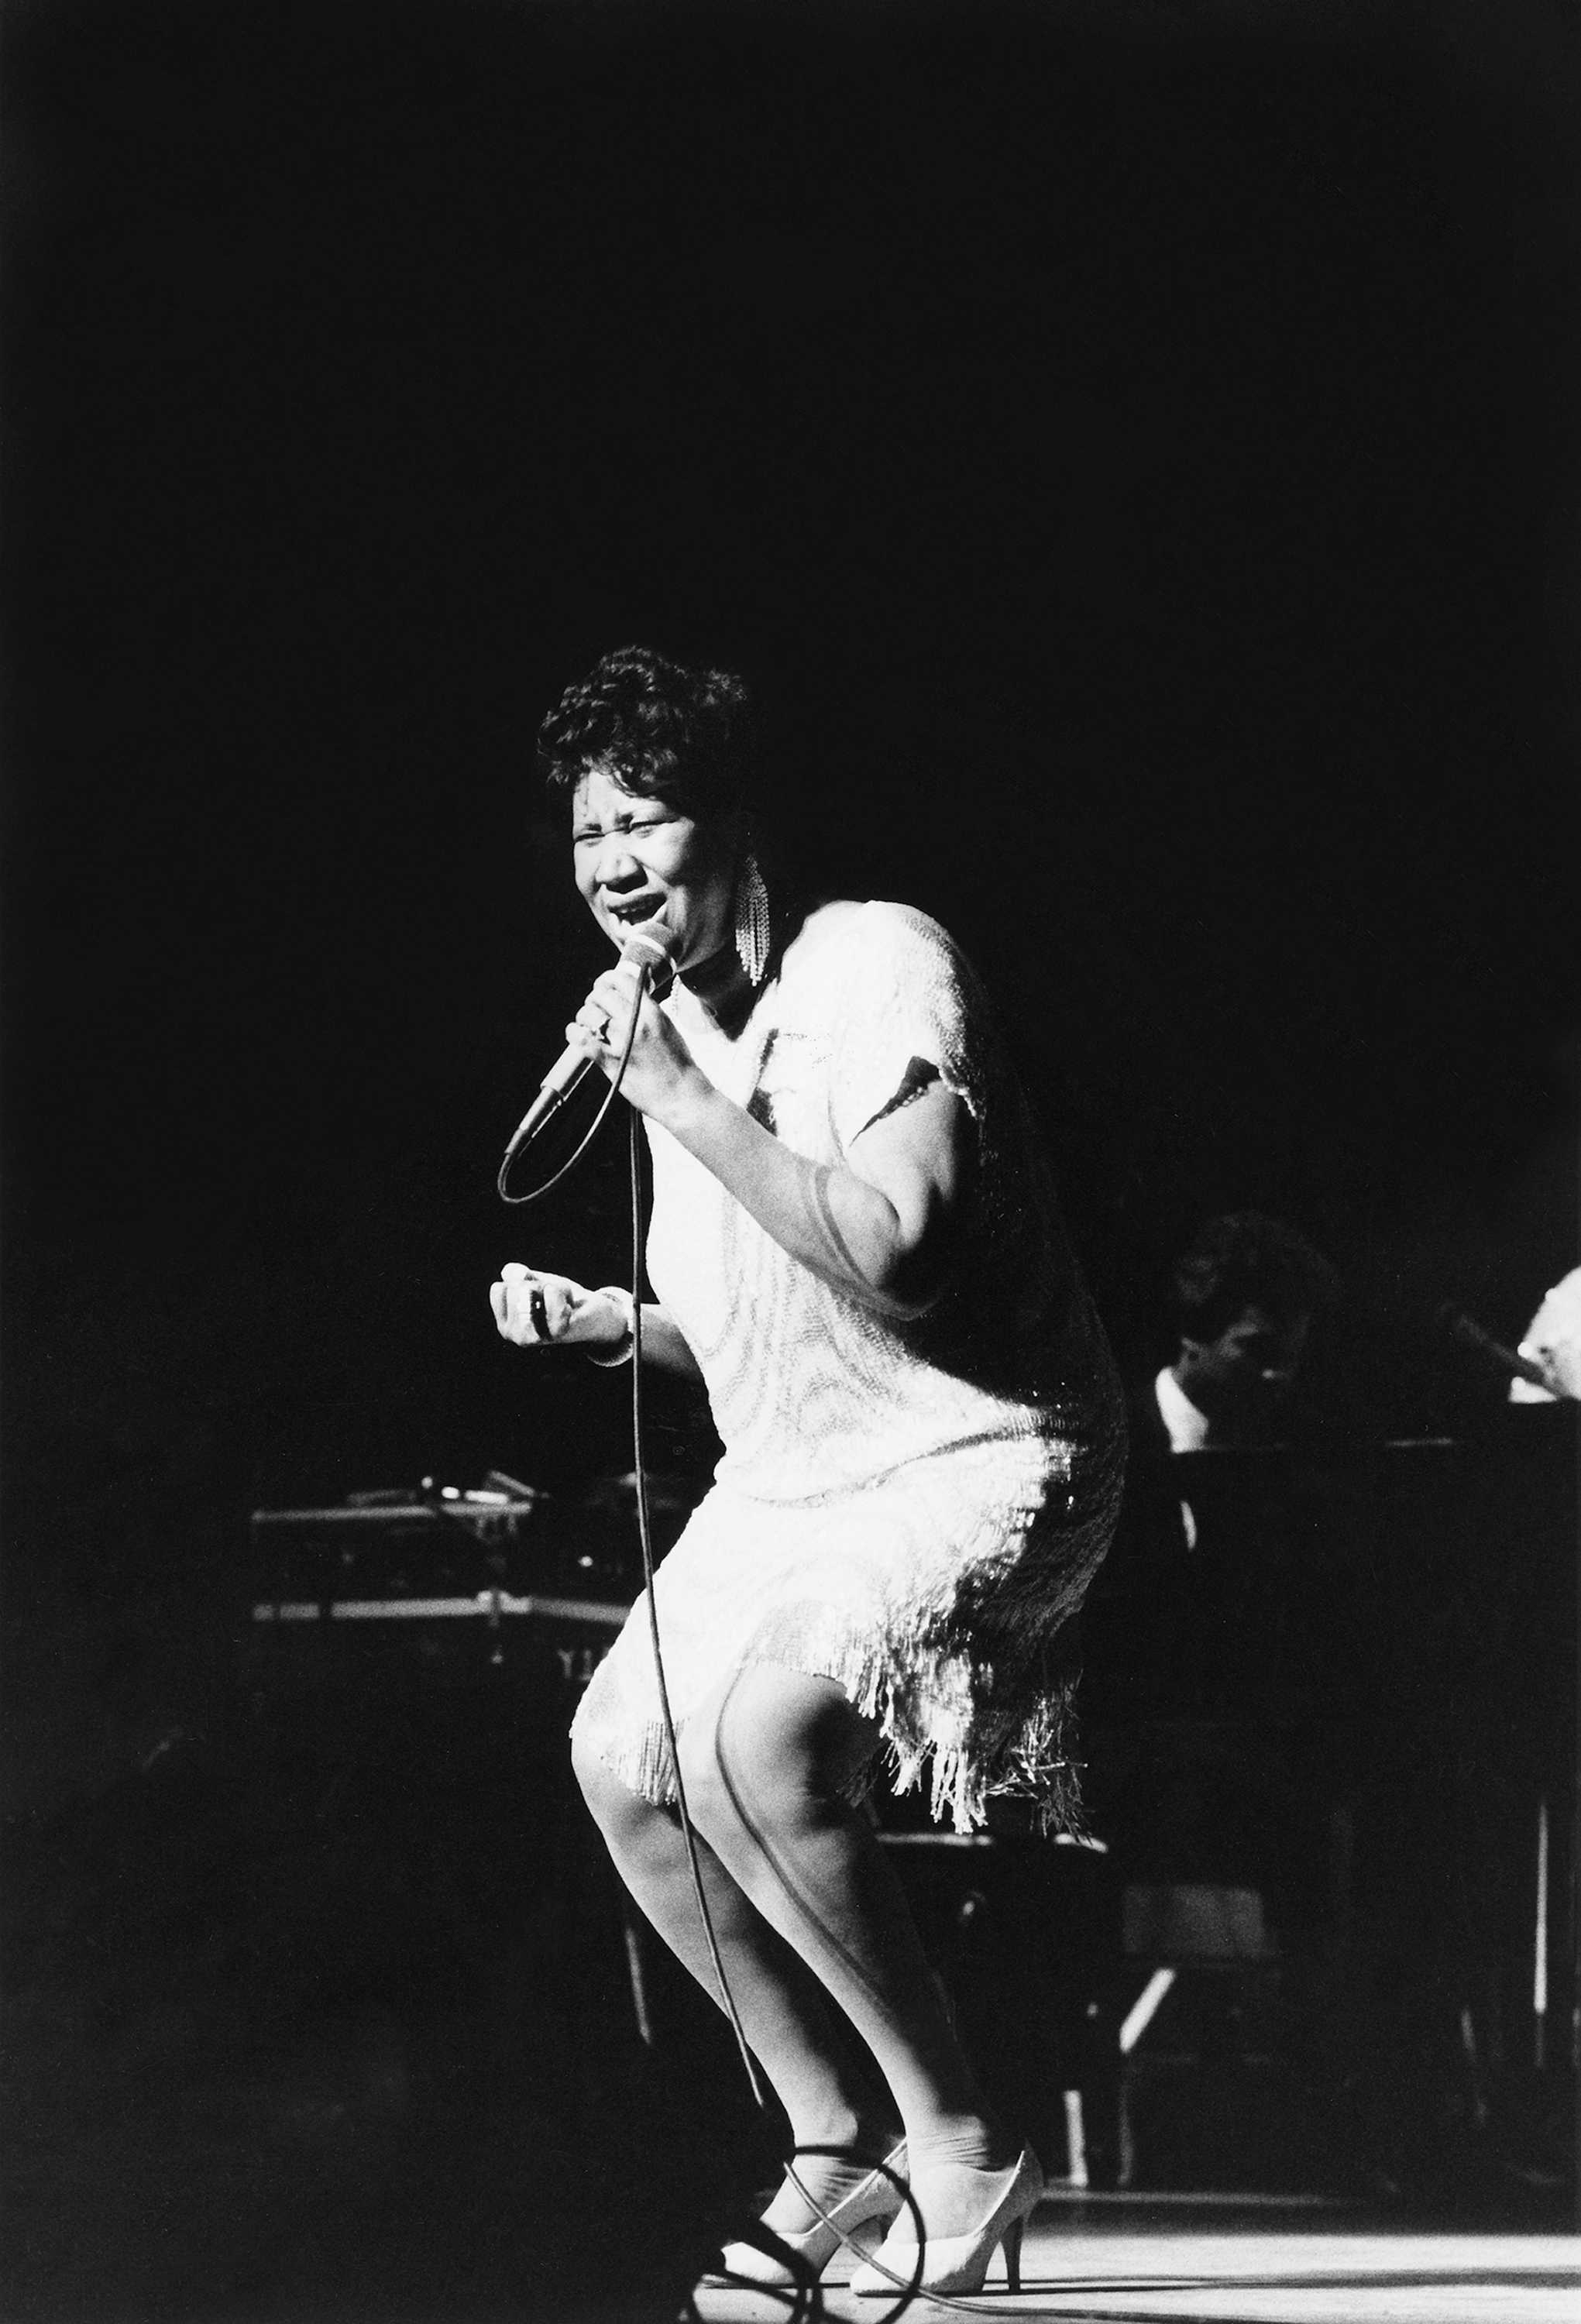 Black and white photograph of Aretha Franklin performing on stage